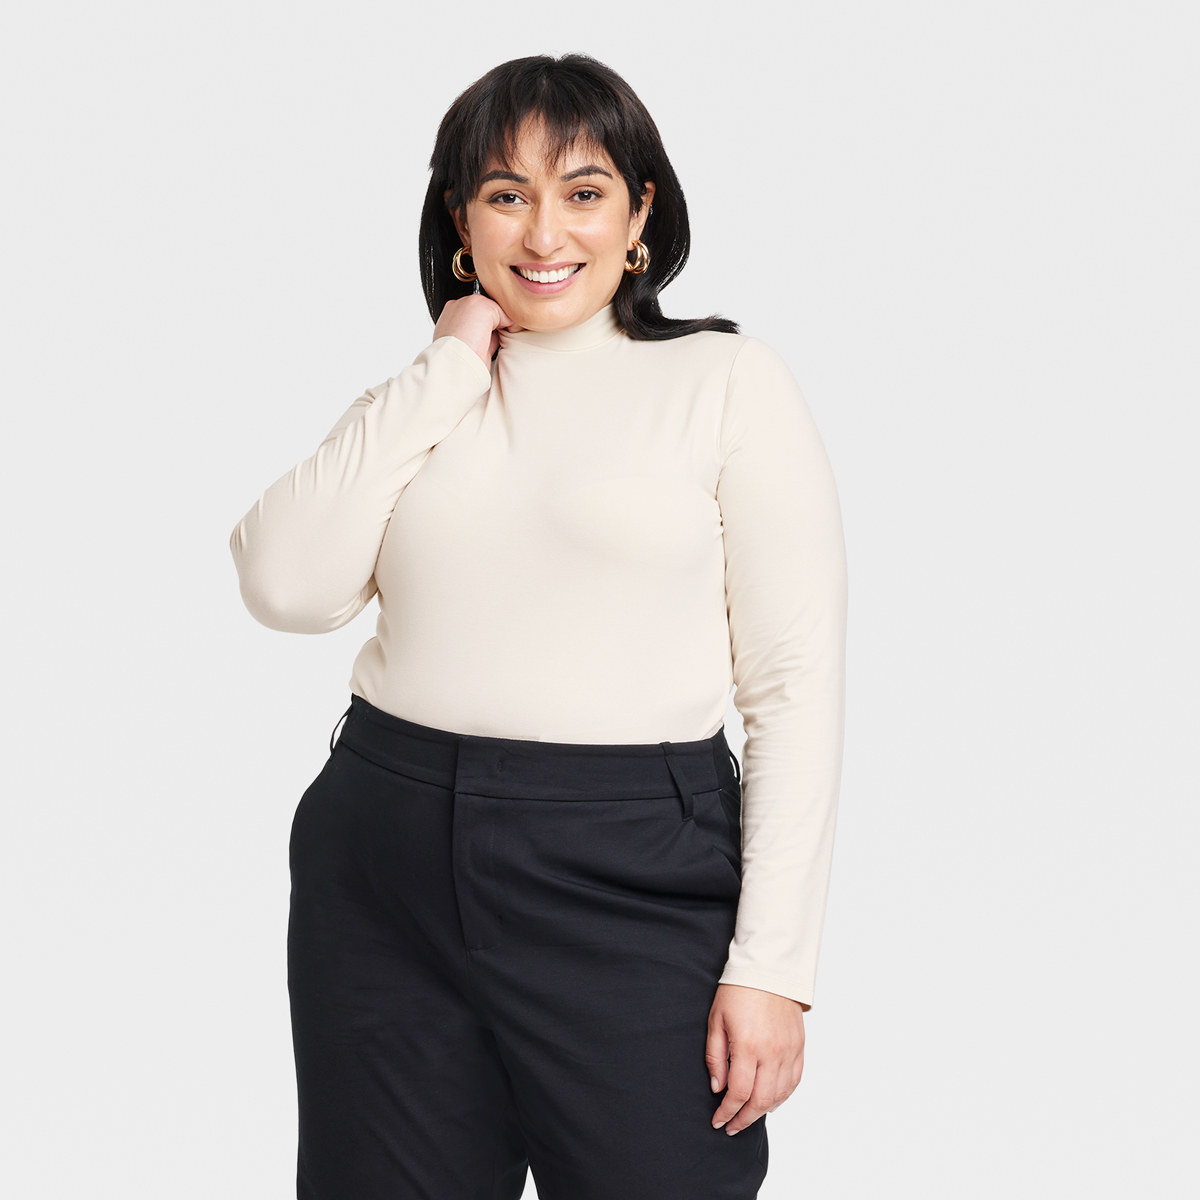 Woman strikes cute pose while wearing turtleneck and formal pants